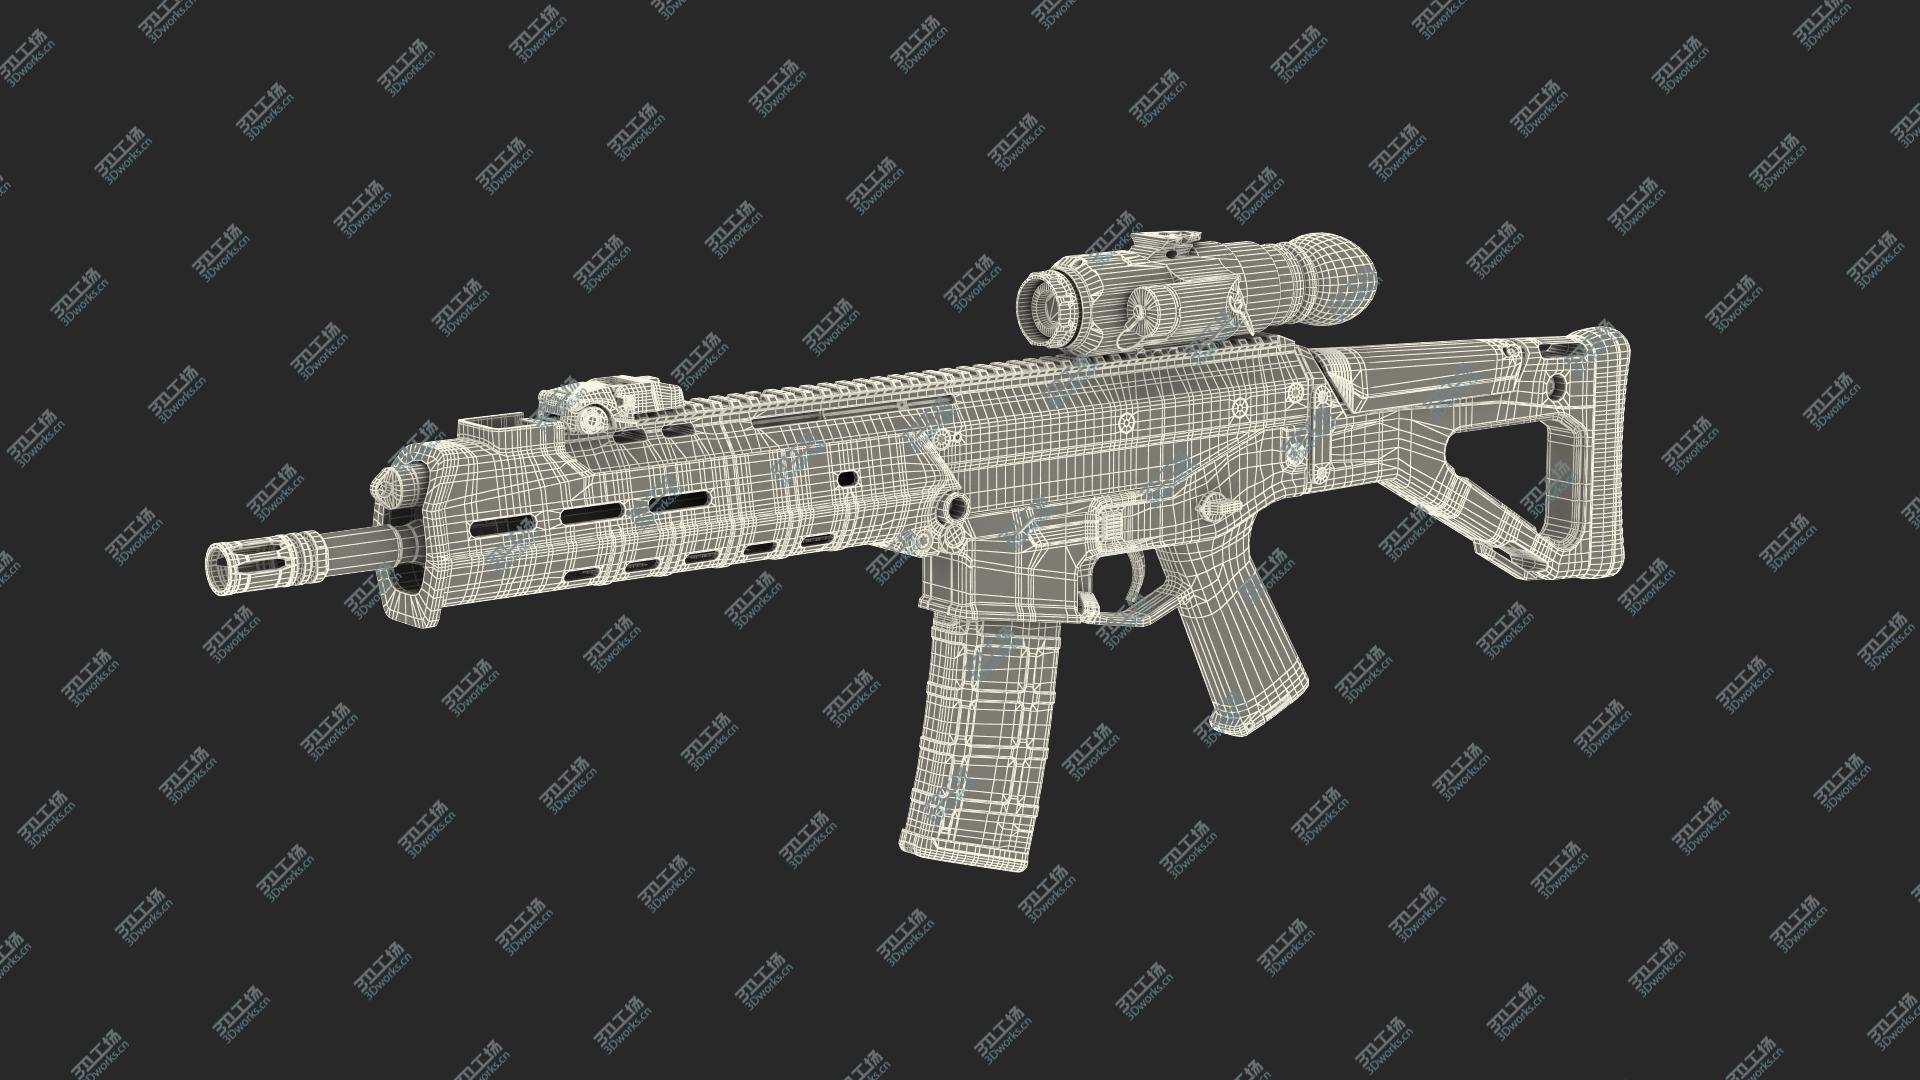 images/goods_img/202105071/3D Combat Rifle with Thermal IR Scope/3.jpg